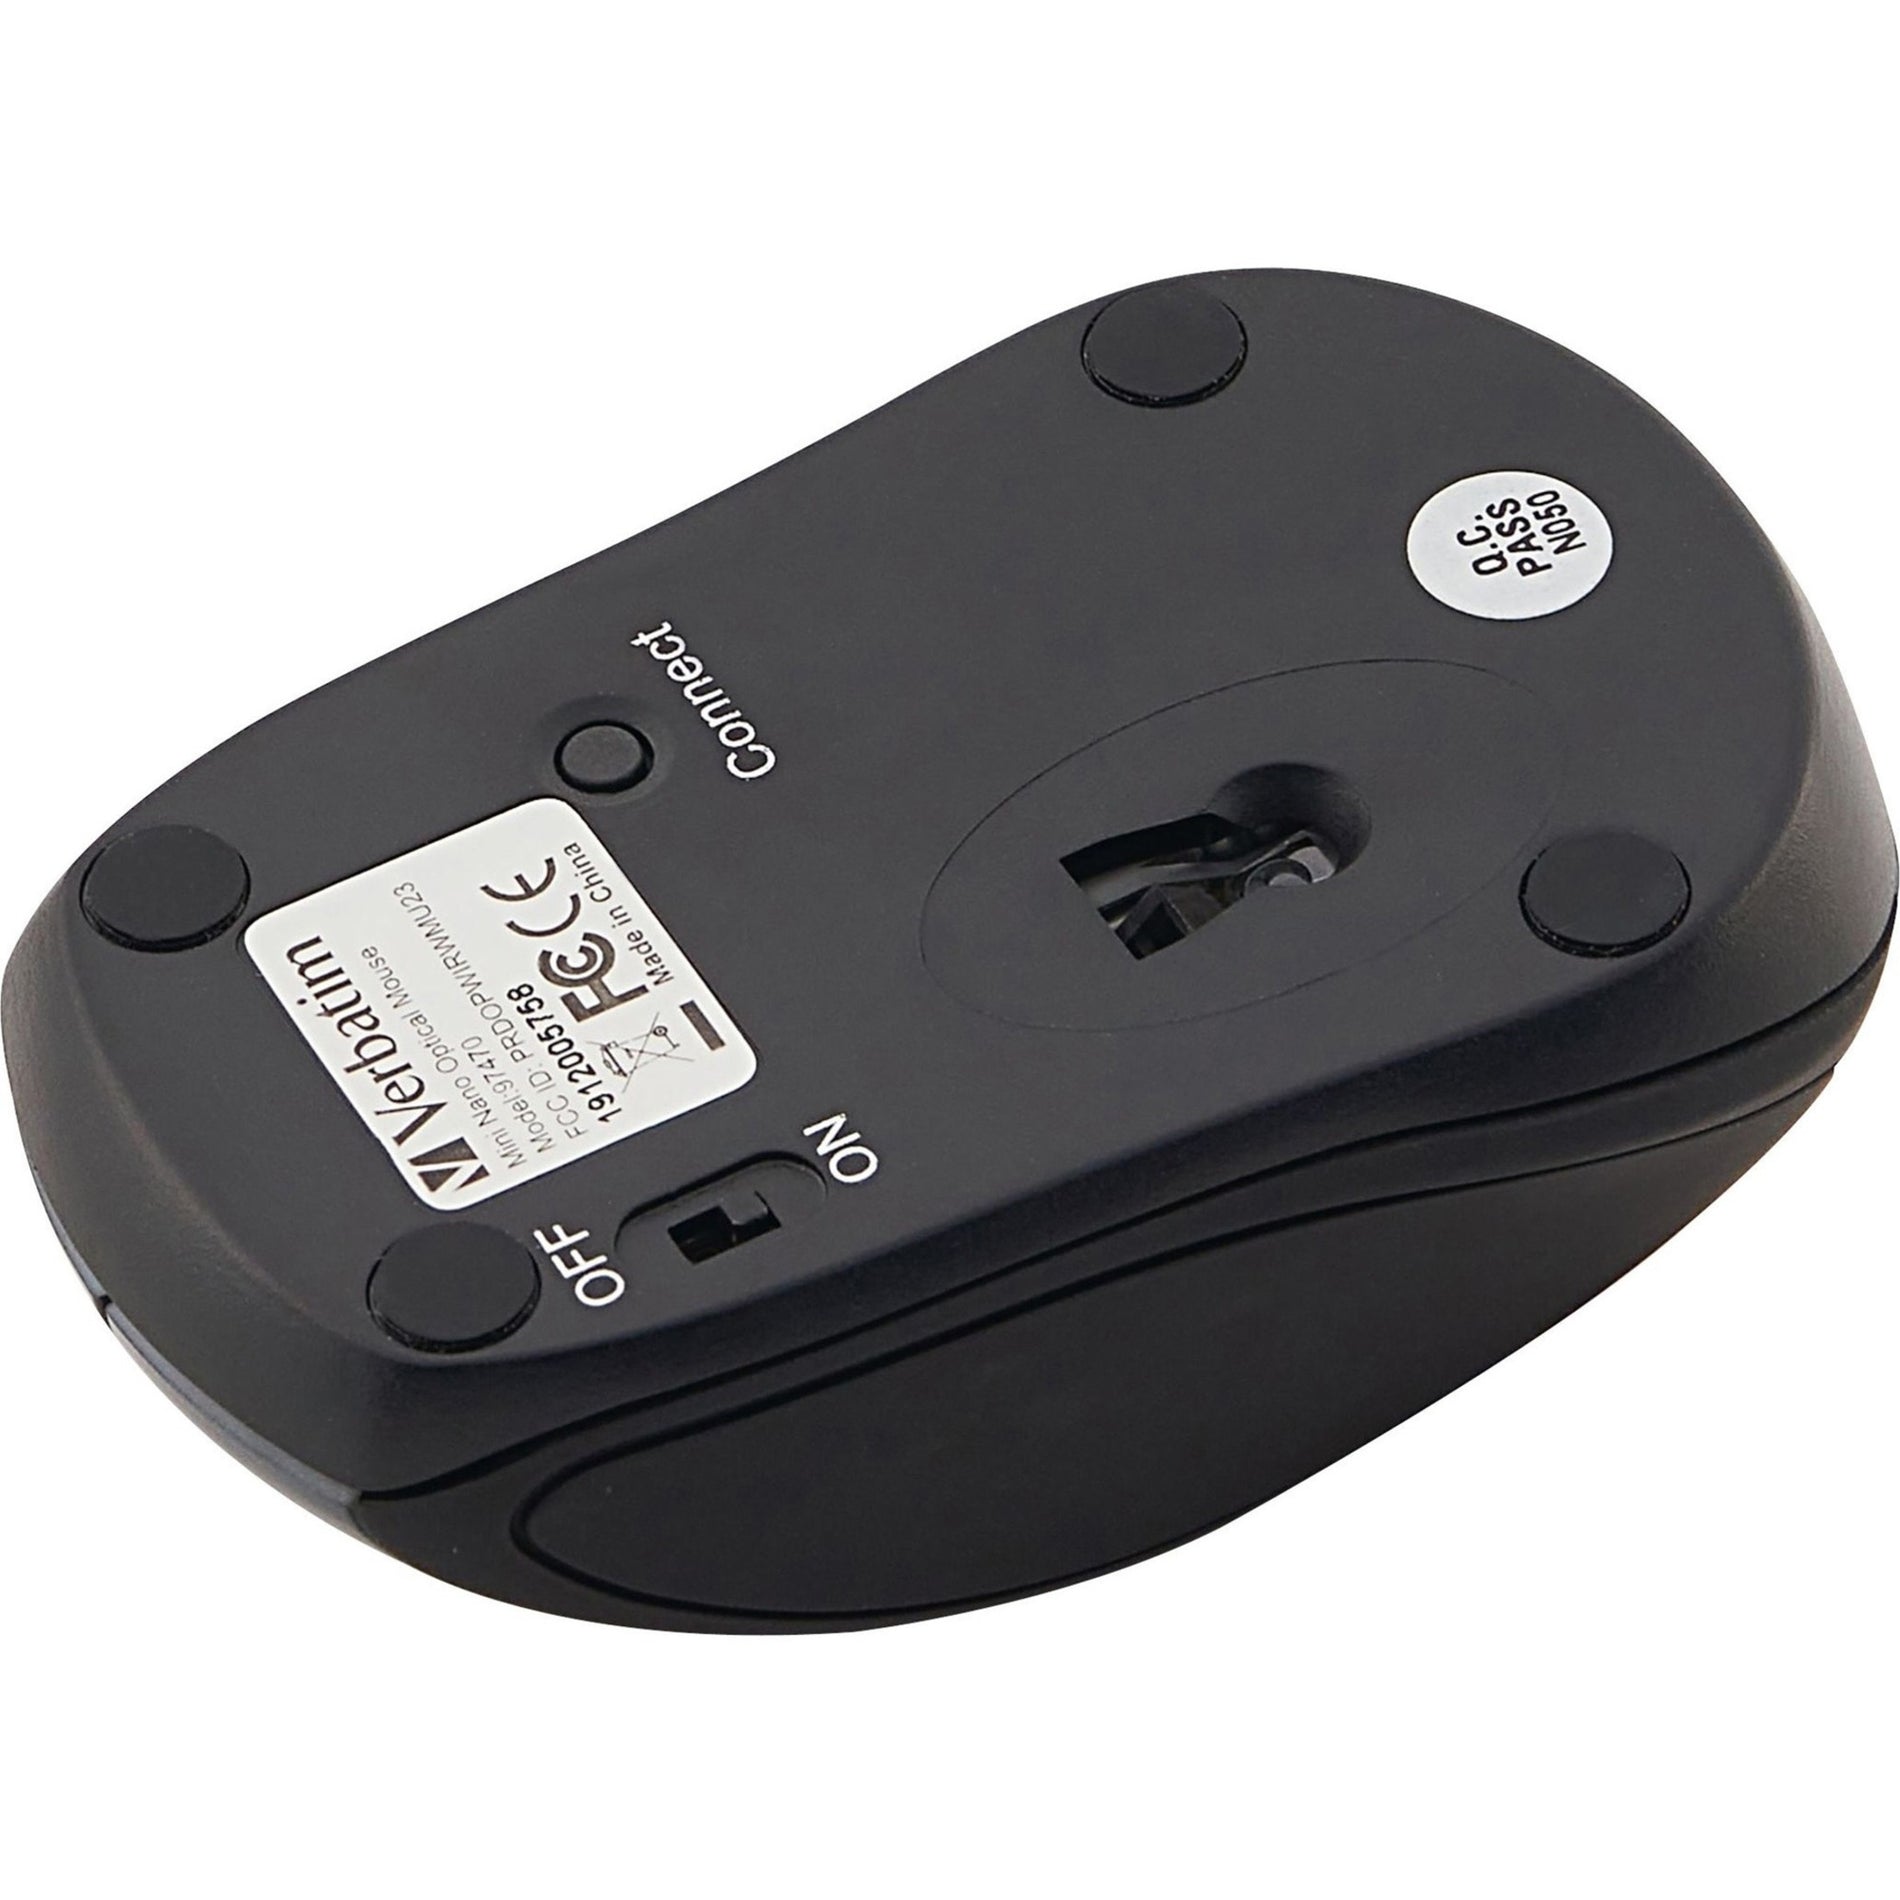 Verbatim 97470 Wireless Mini Travel Mouse, Graphite - Compact and Portable Optical Mouse with Scroll Wheel